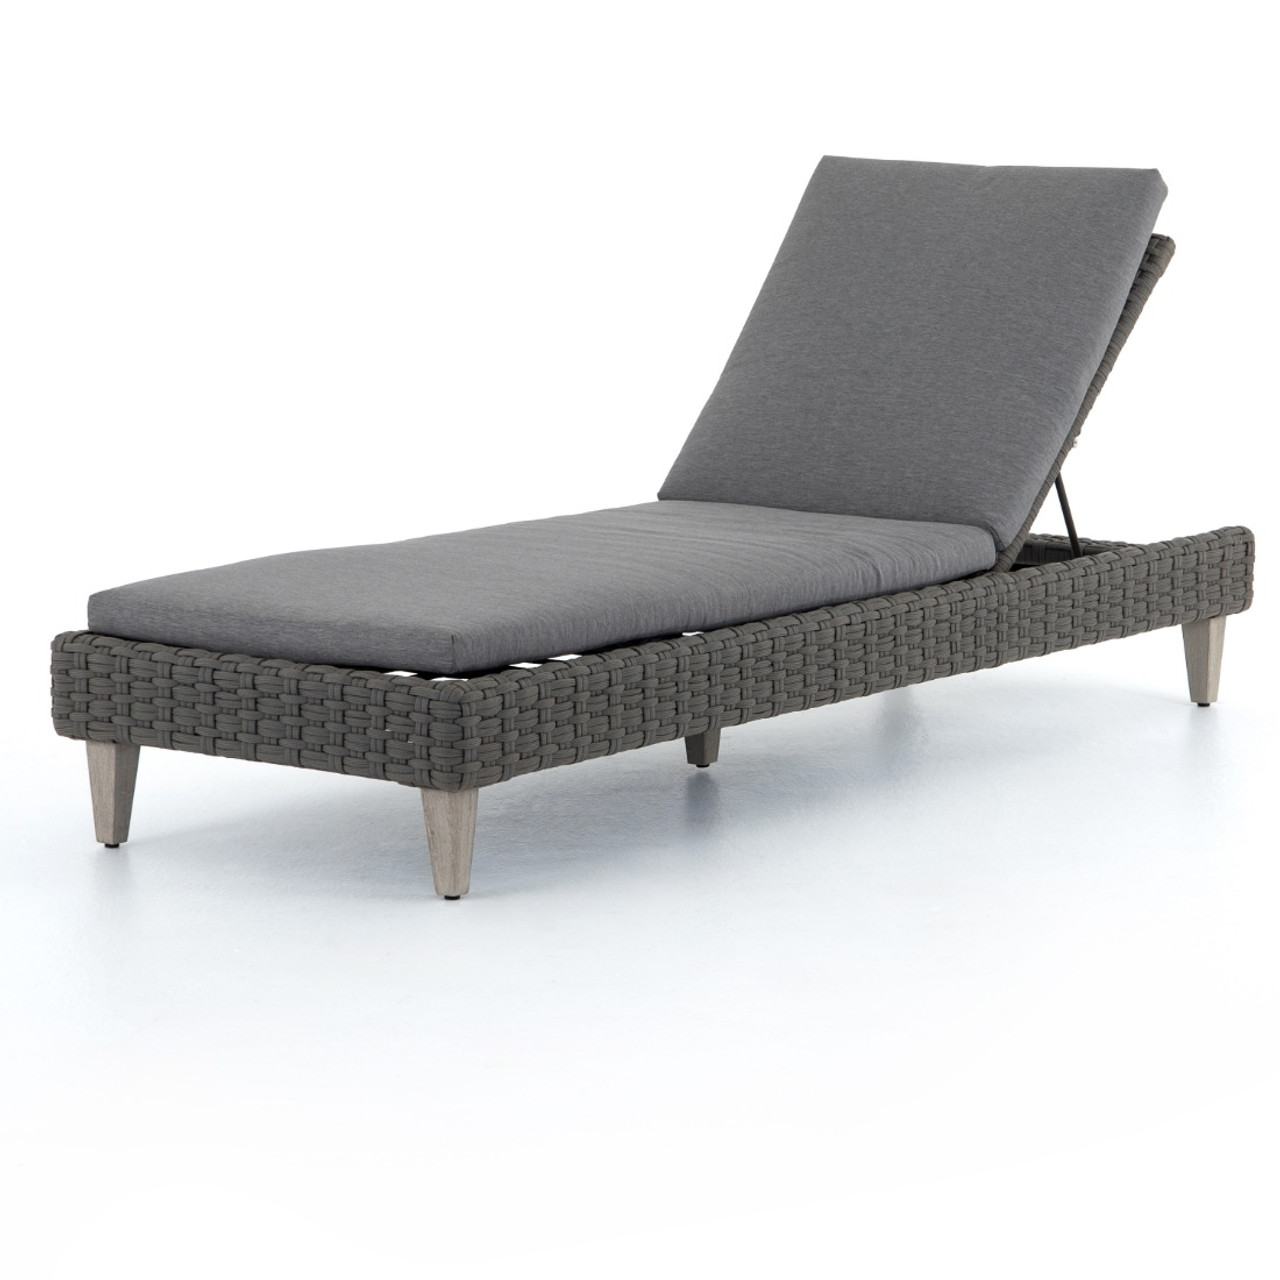 Bewolkt Authenticatie interferentie Remi Charcoal Woven Rope Outdoor Chaise Lounge | Zin Home